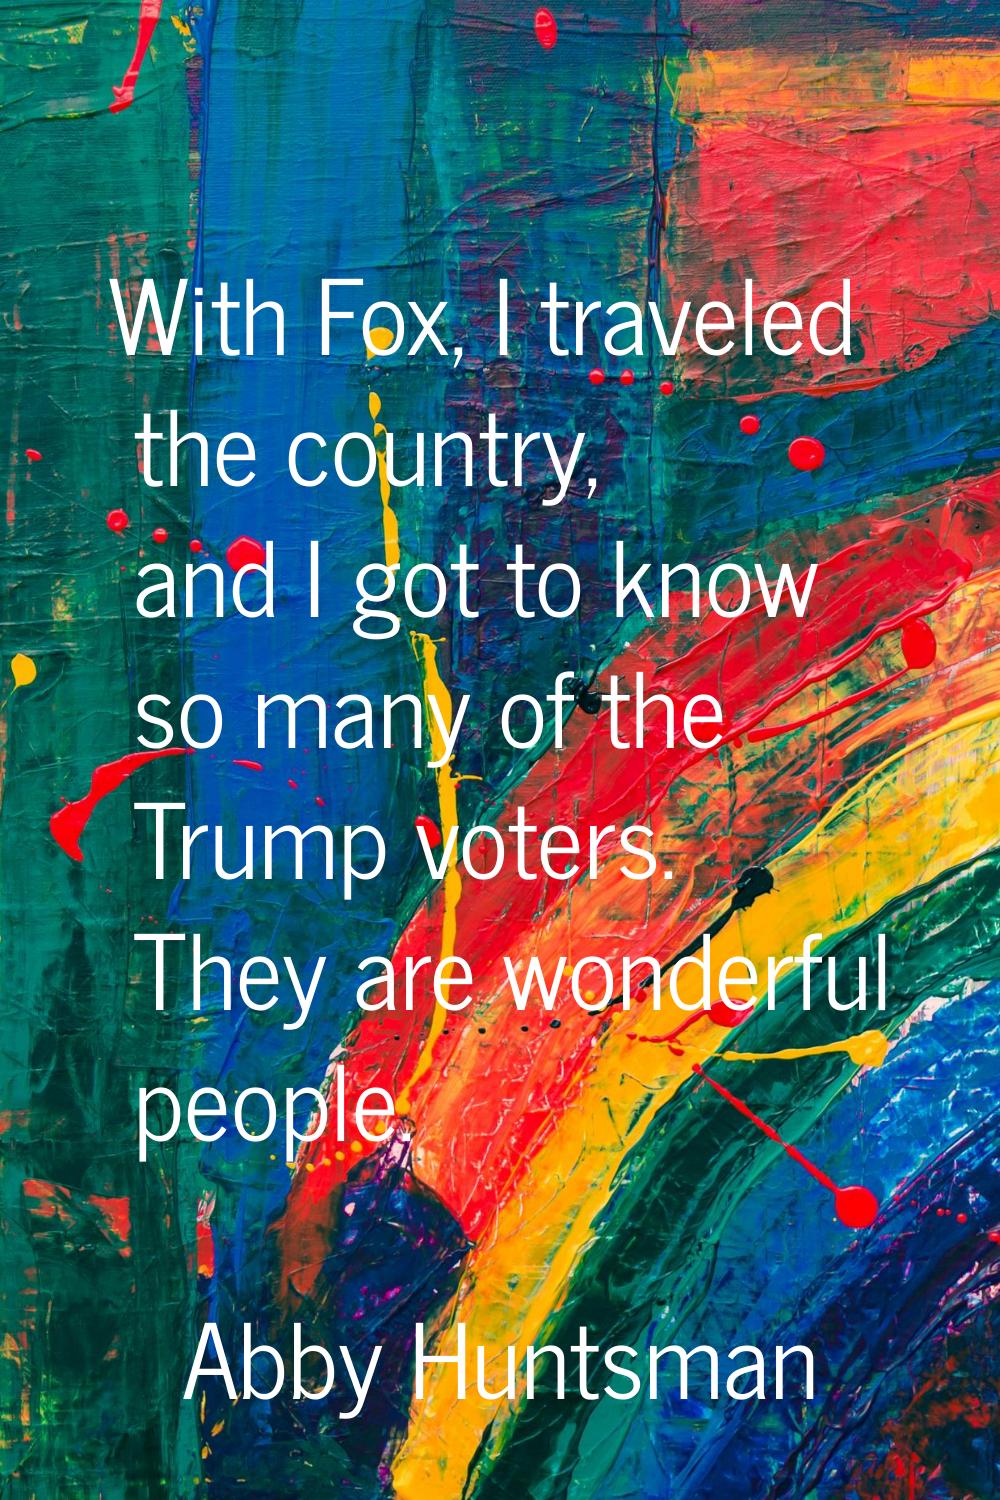 With Fox, I traveled the country, and I got to know so many of the Trump voters. They are wonderful